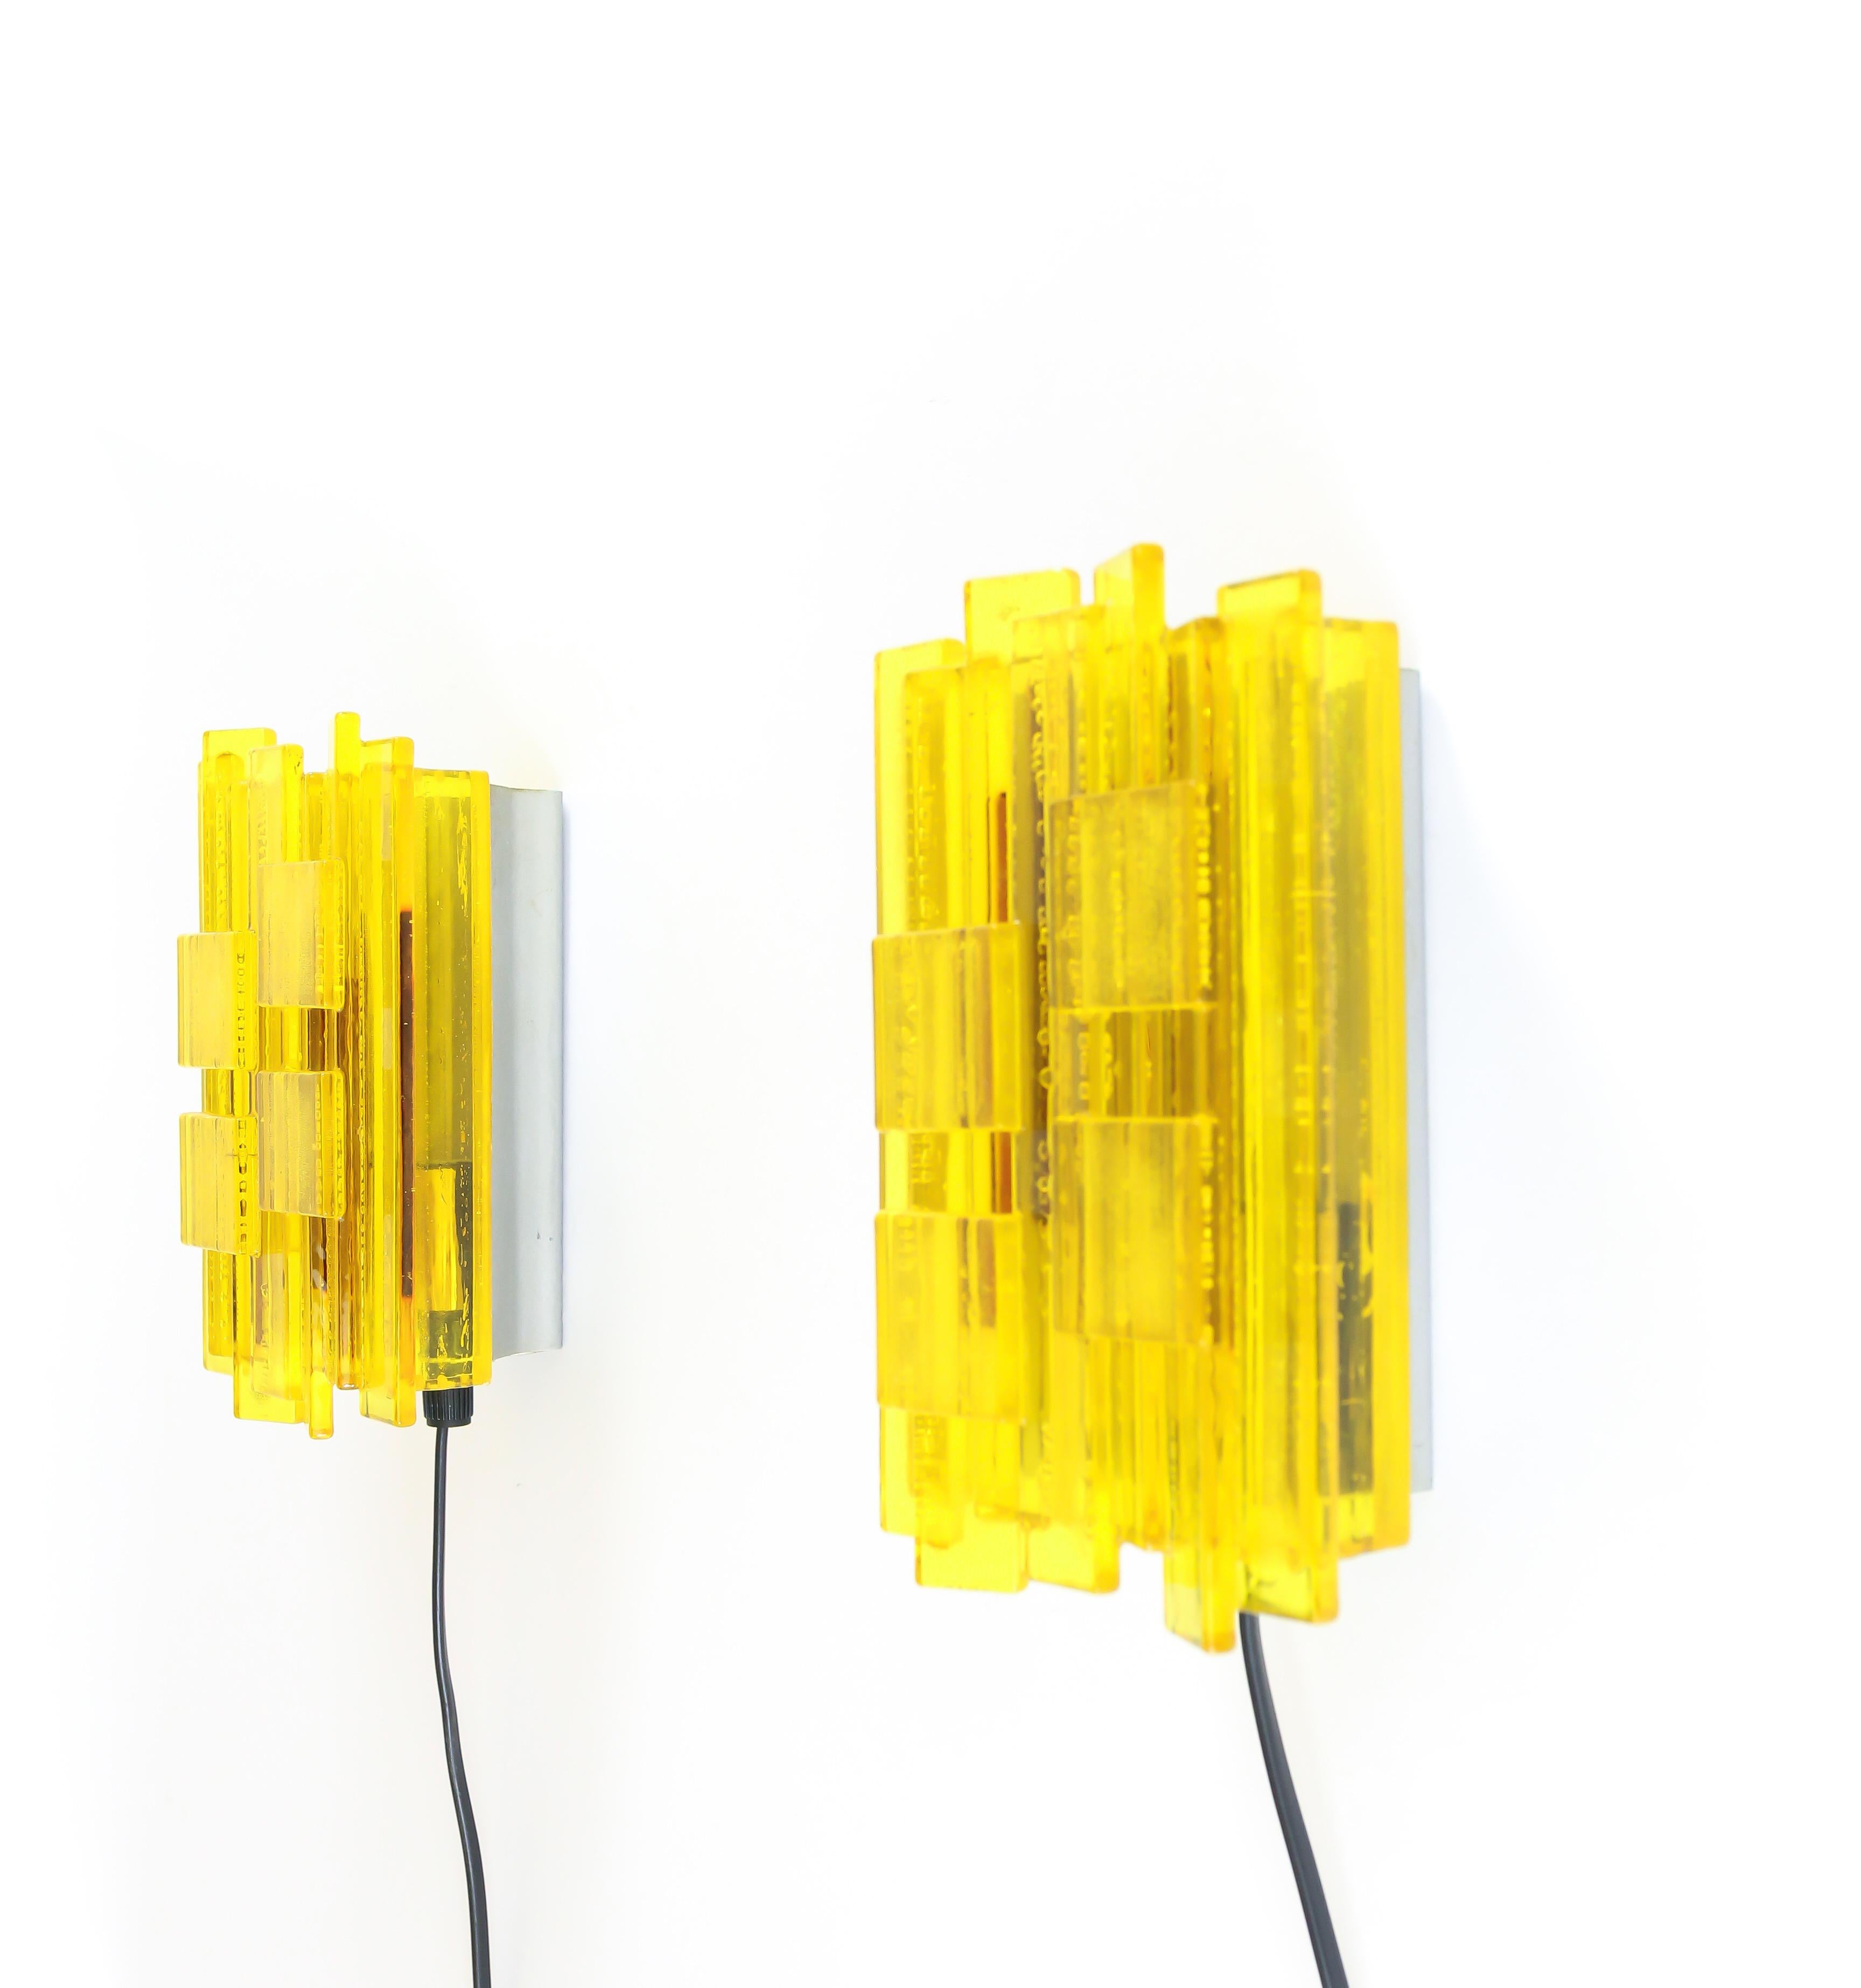 A pair of yellow handmade acrylic wall lamps. The sconces were designed by Claus Bolby and manufactured by his own company, Cebo Industri. By experimenting, Bolby discovered a technique allowing him to introduce bubbles into the acrylic, which adds